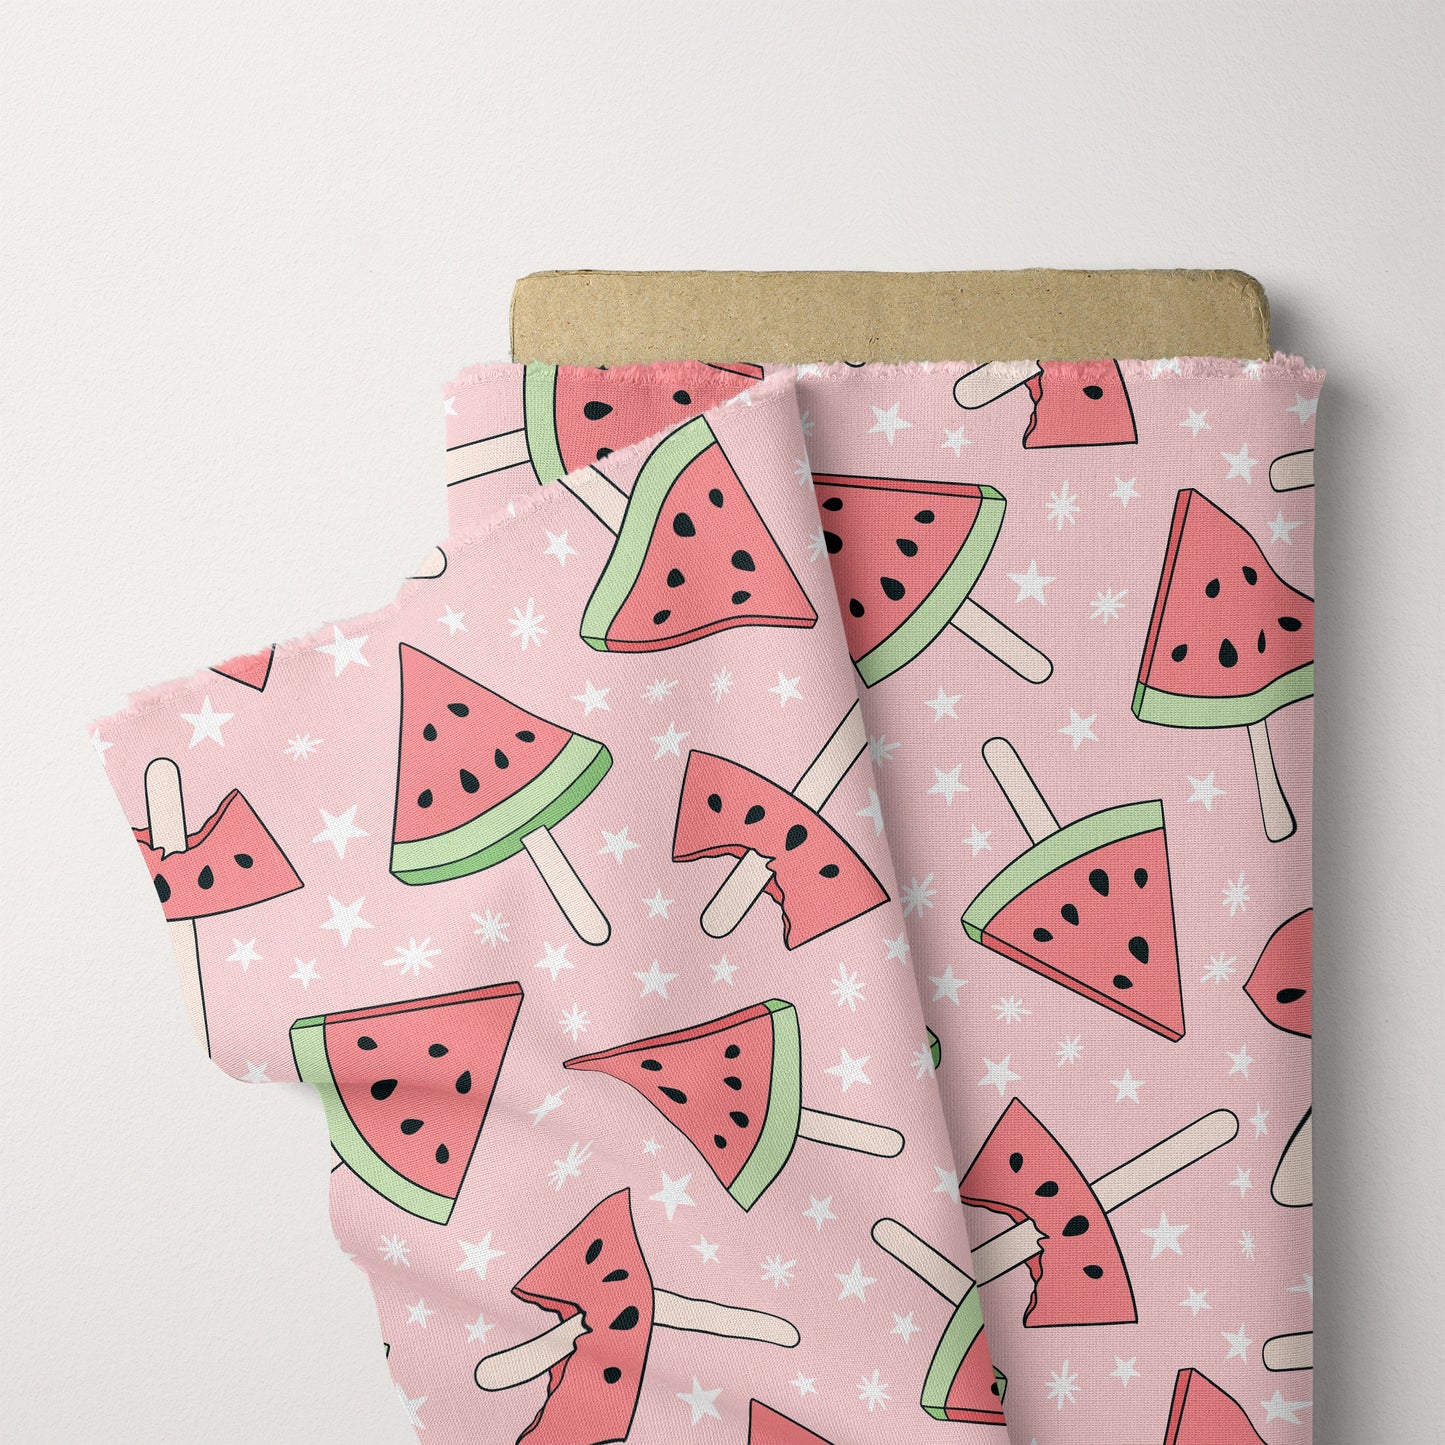 Summer Pattern Watermelon Popsicles Seamless Repeat Pattern for Fabric Sublimation